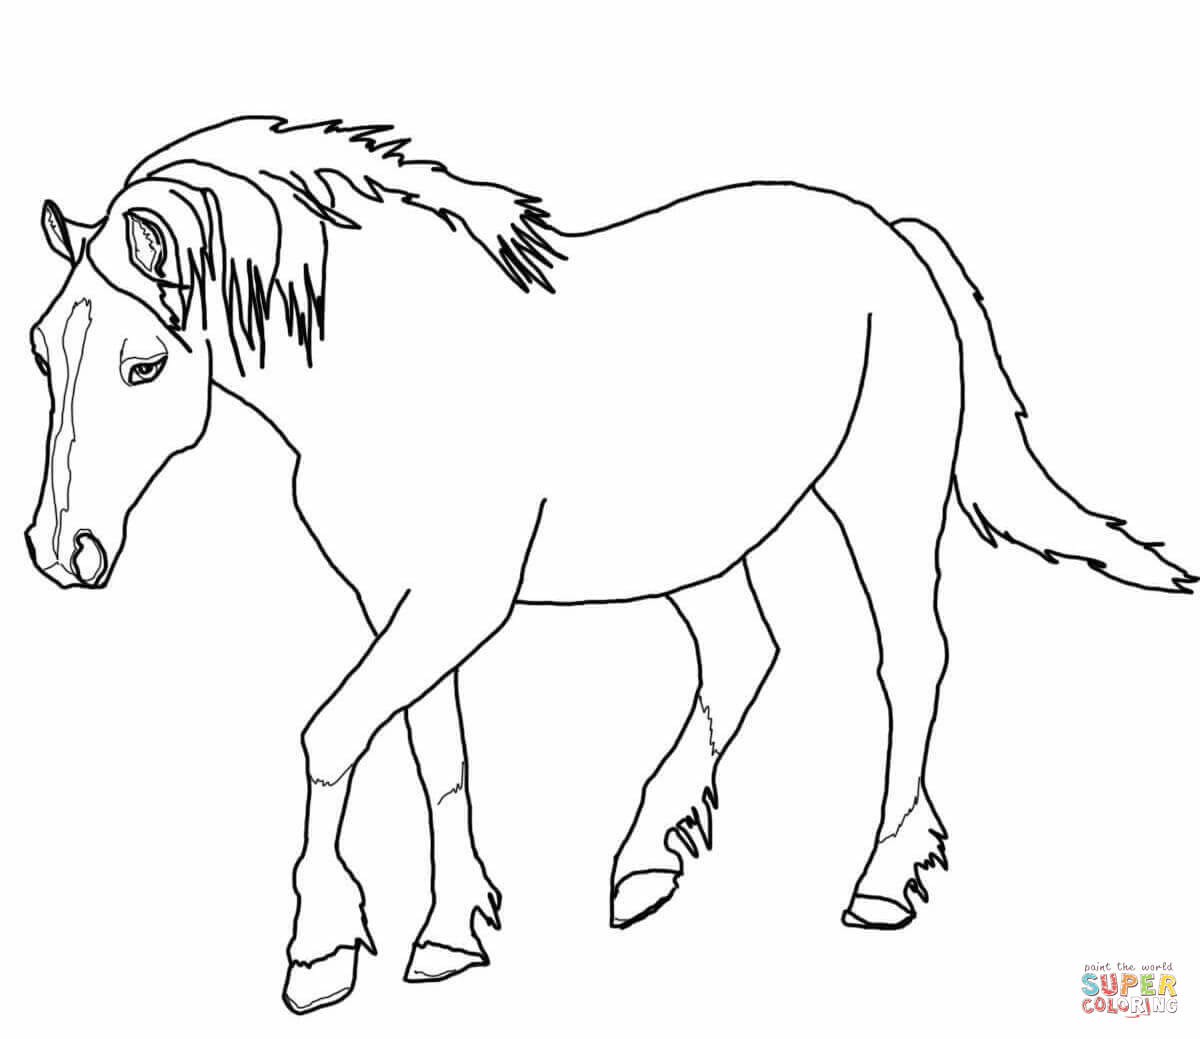 Palomino welsh horse coloring page free printable coloring pages